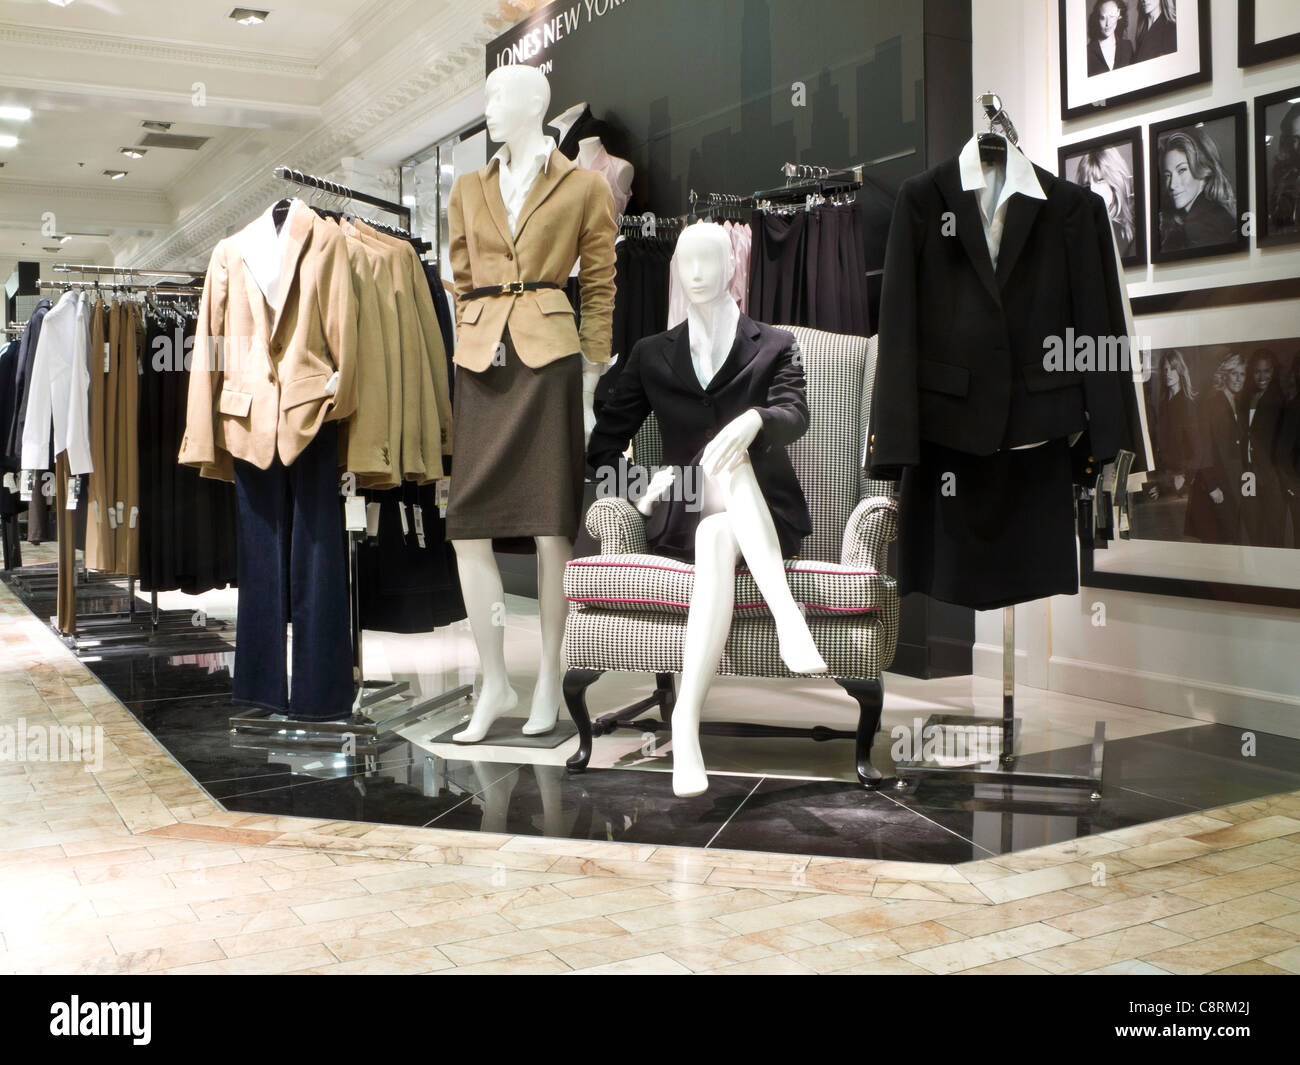 Lord & Taylor, Jones New York Display, Flagship Store, 424 Fifth Avenue, NYC Stock Photo